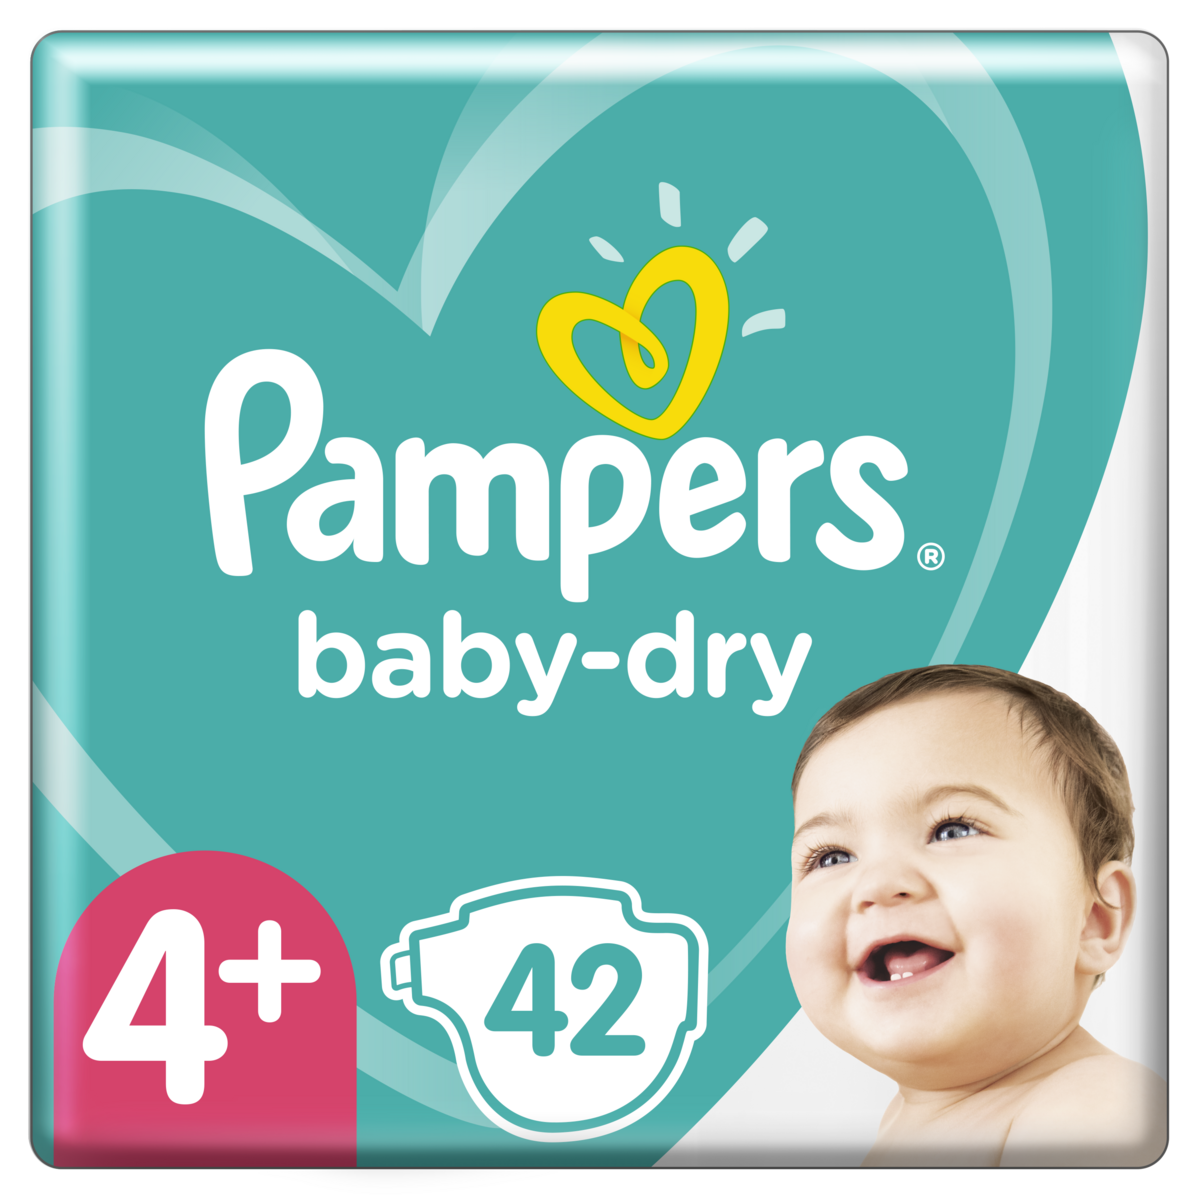 PAMPERS Baby-dry géant couches taille 4+ (10-15kg) 42 couches